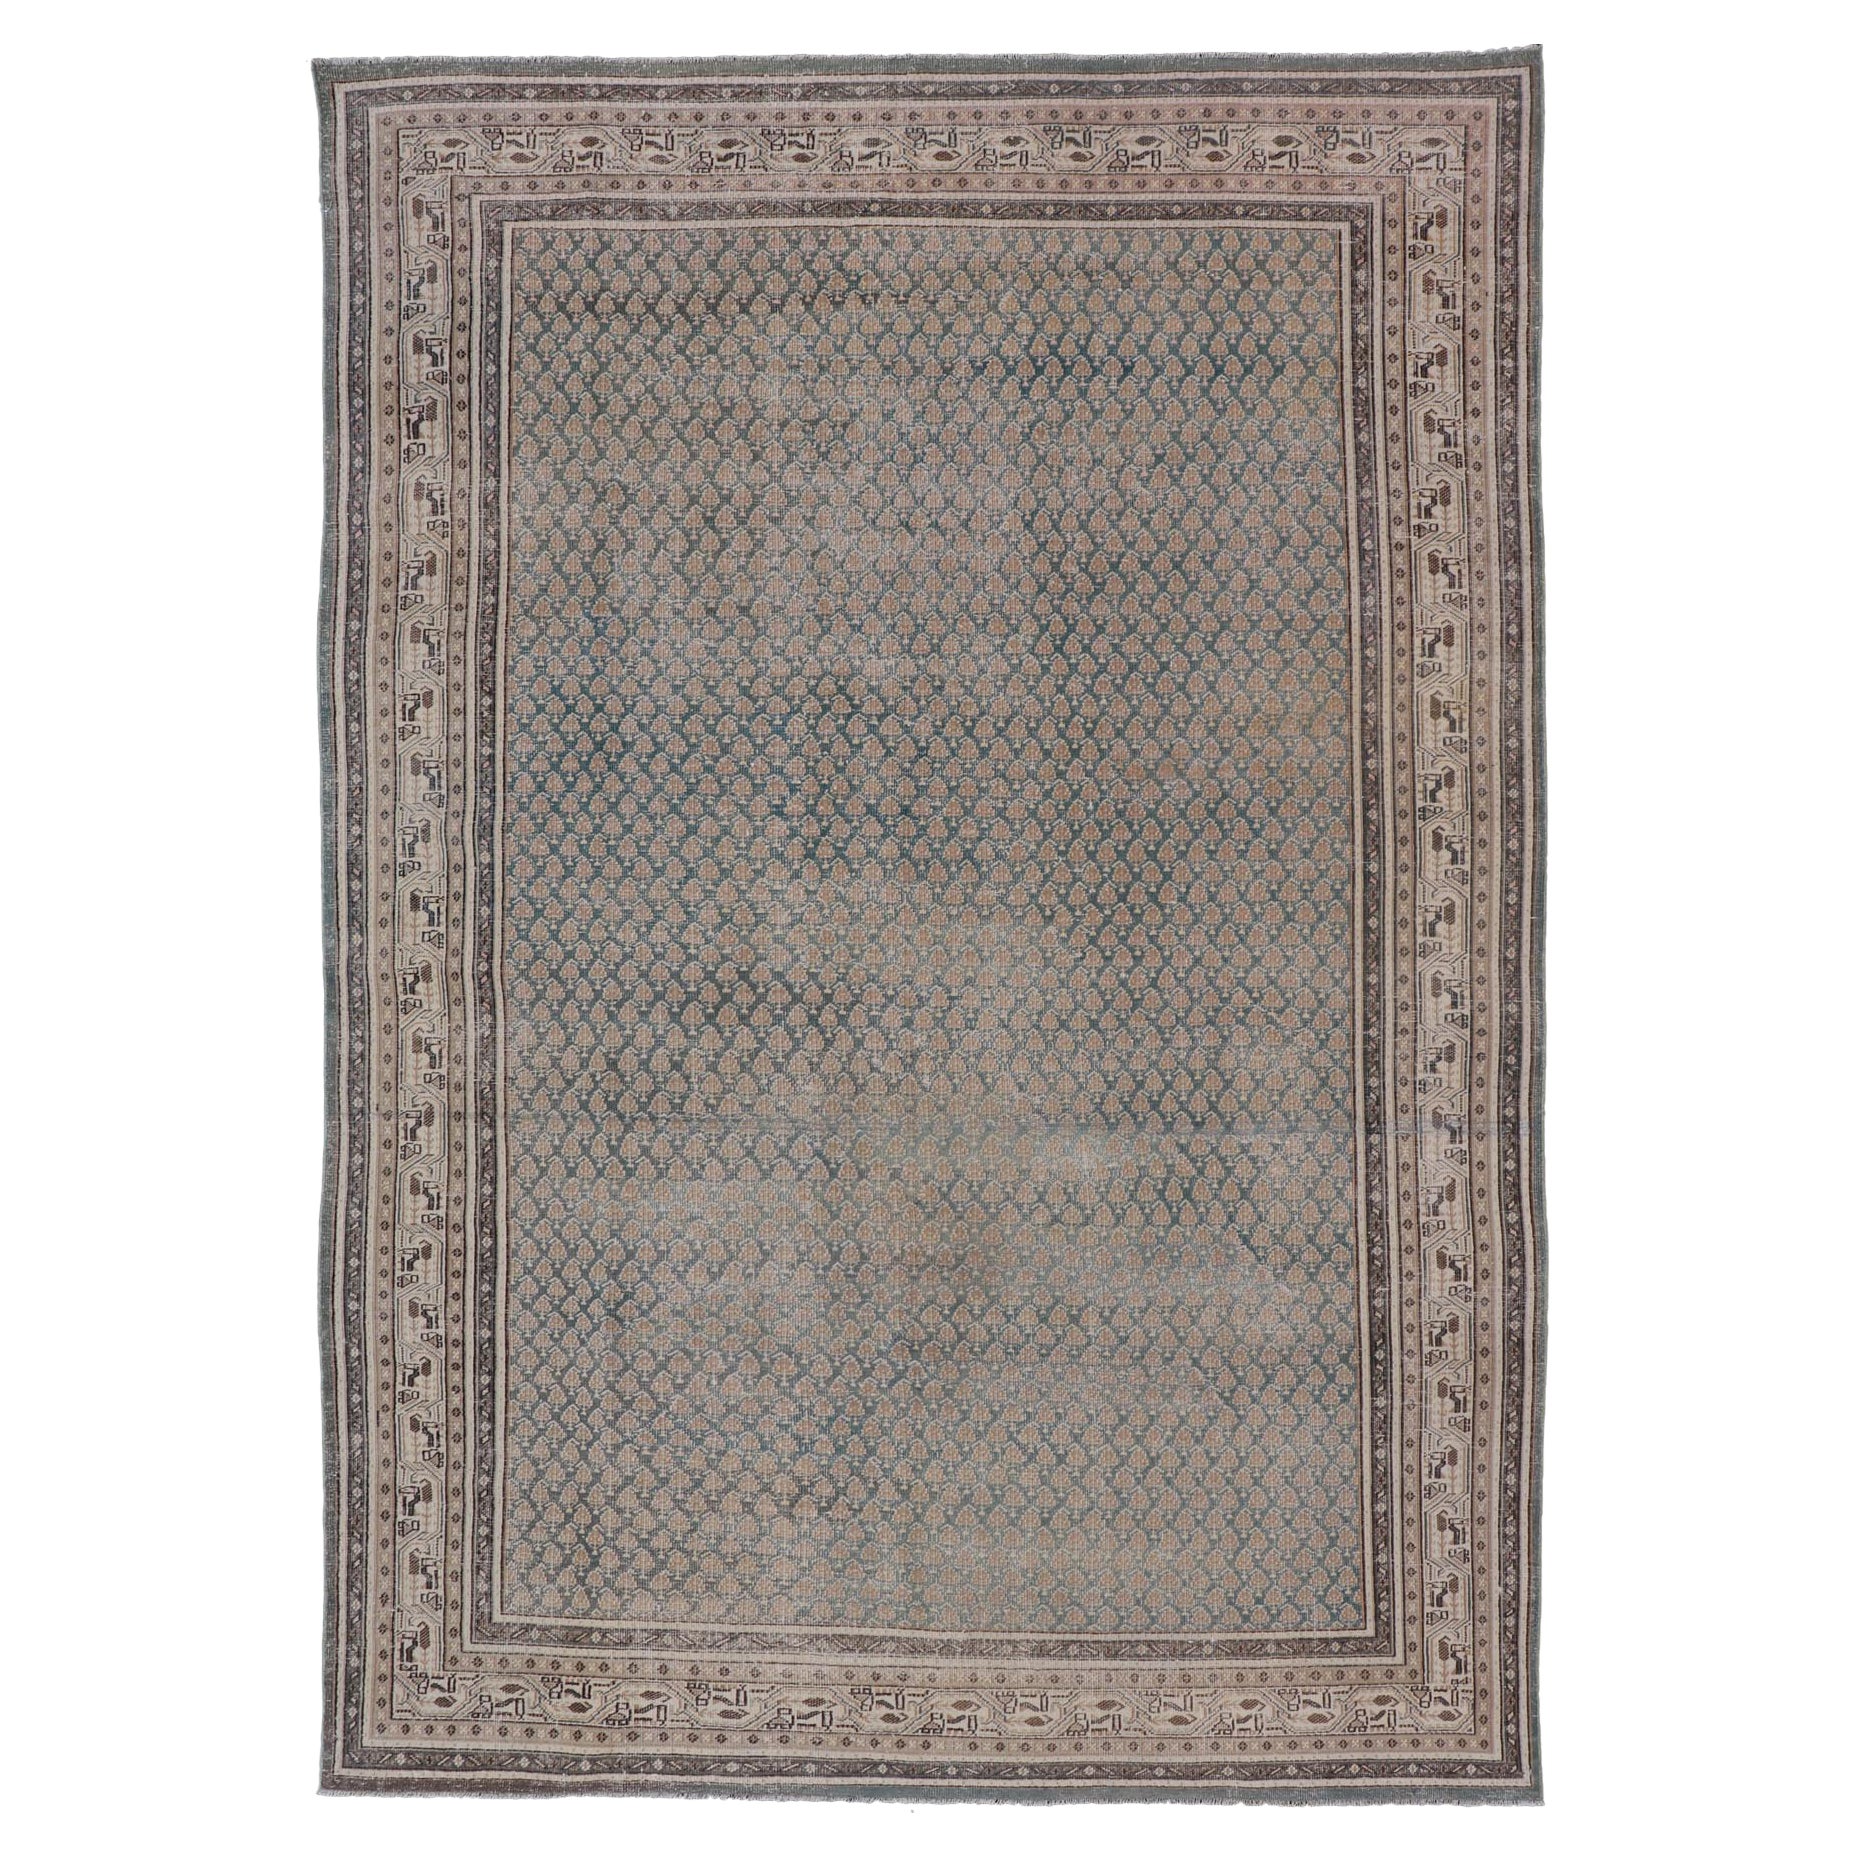 Antique Persian Tabriz Rug with All-Over Paisley Design 